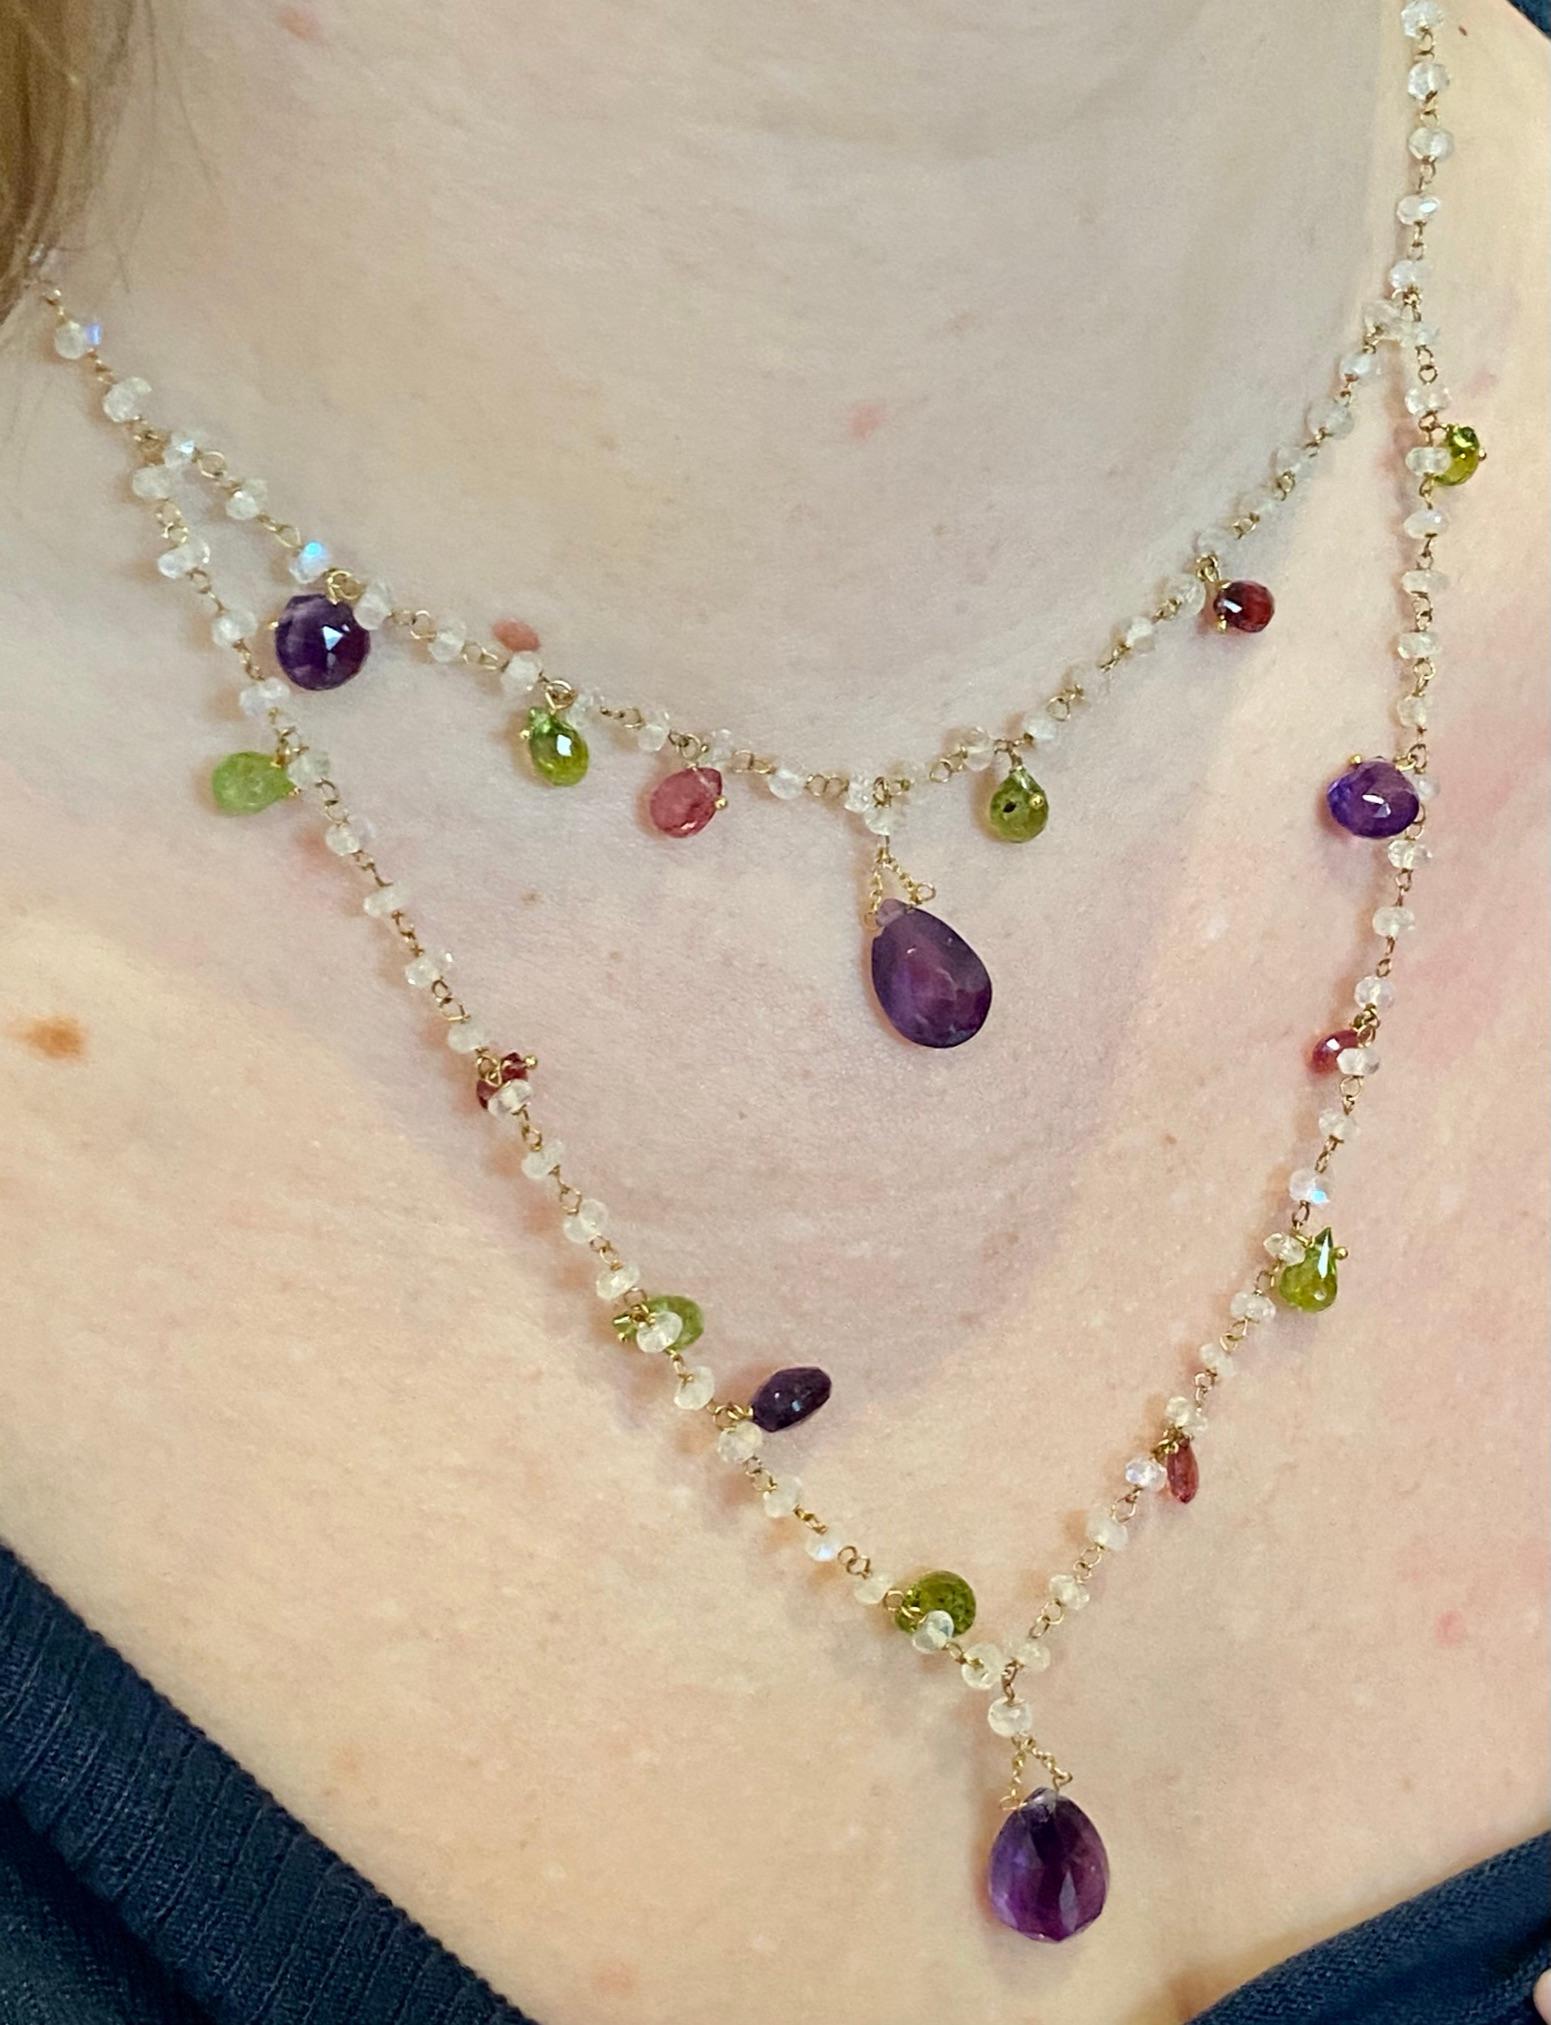 Women's Handmade Necklace, Made of Amethysts, Peridots, Rubelite and Moonstones, Gold